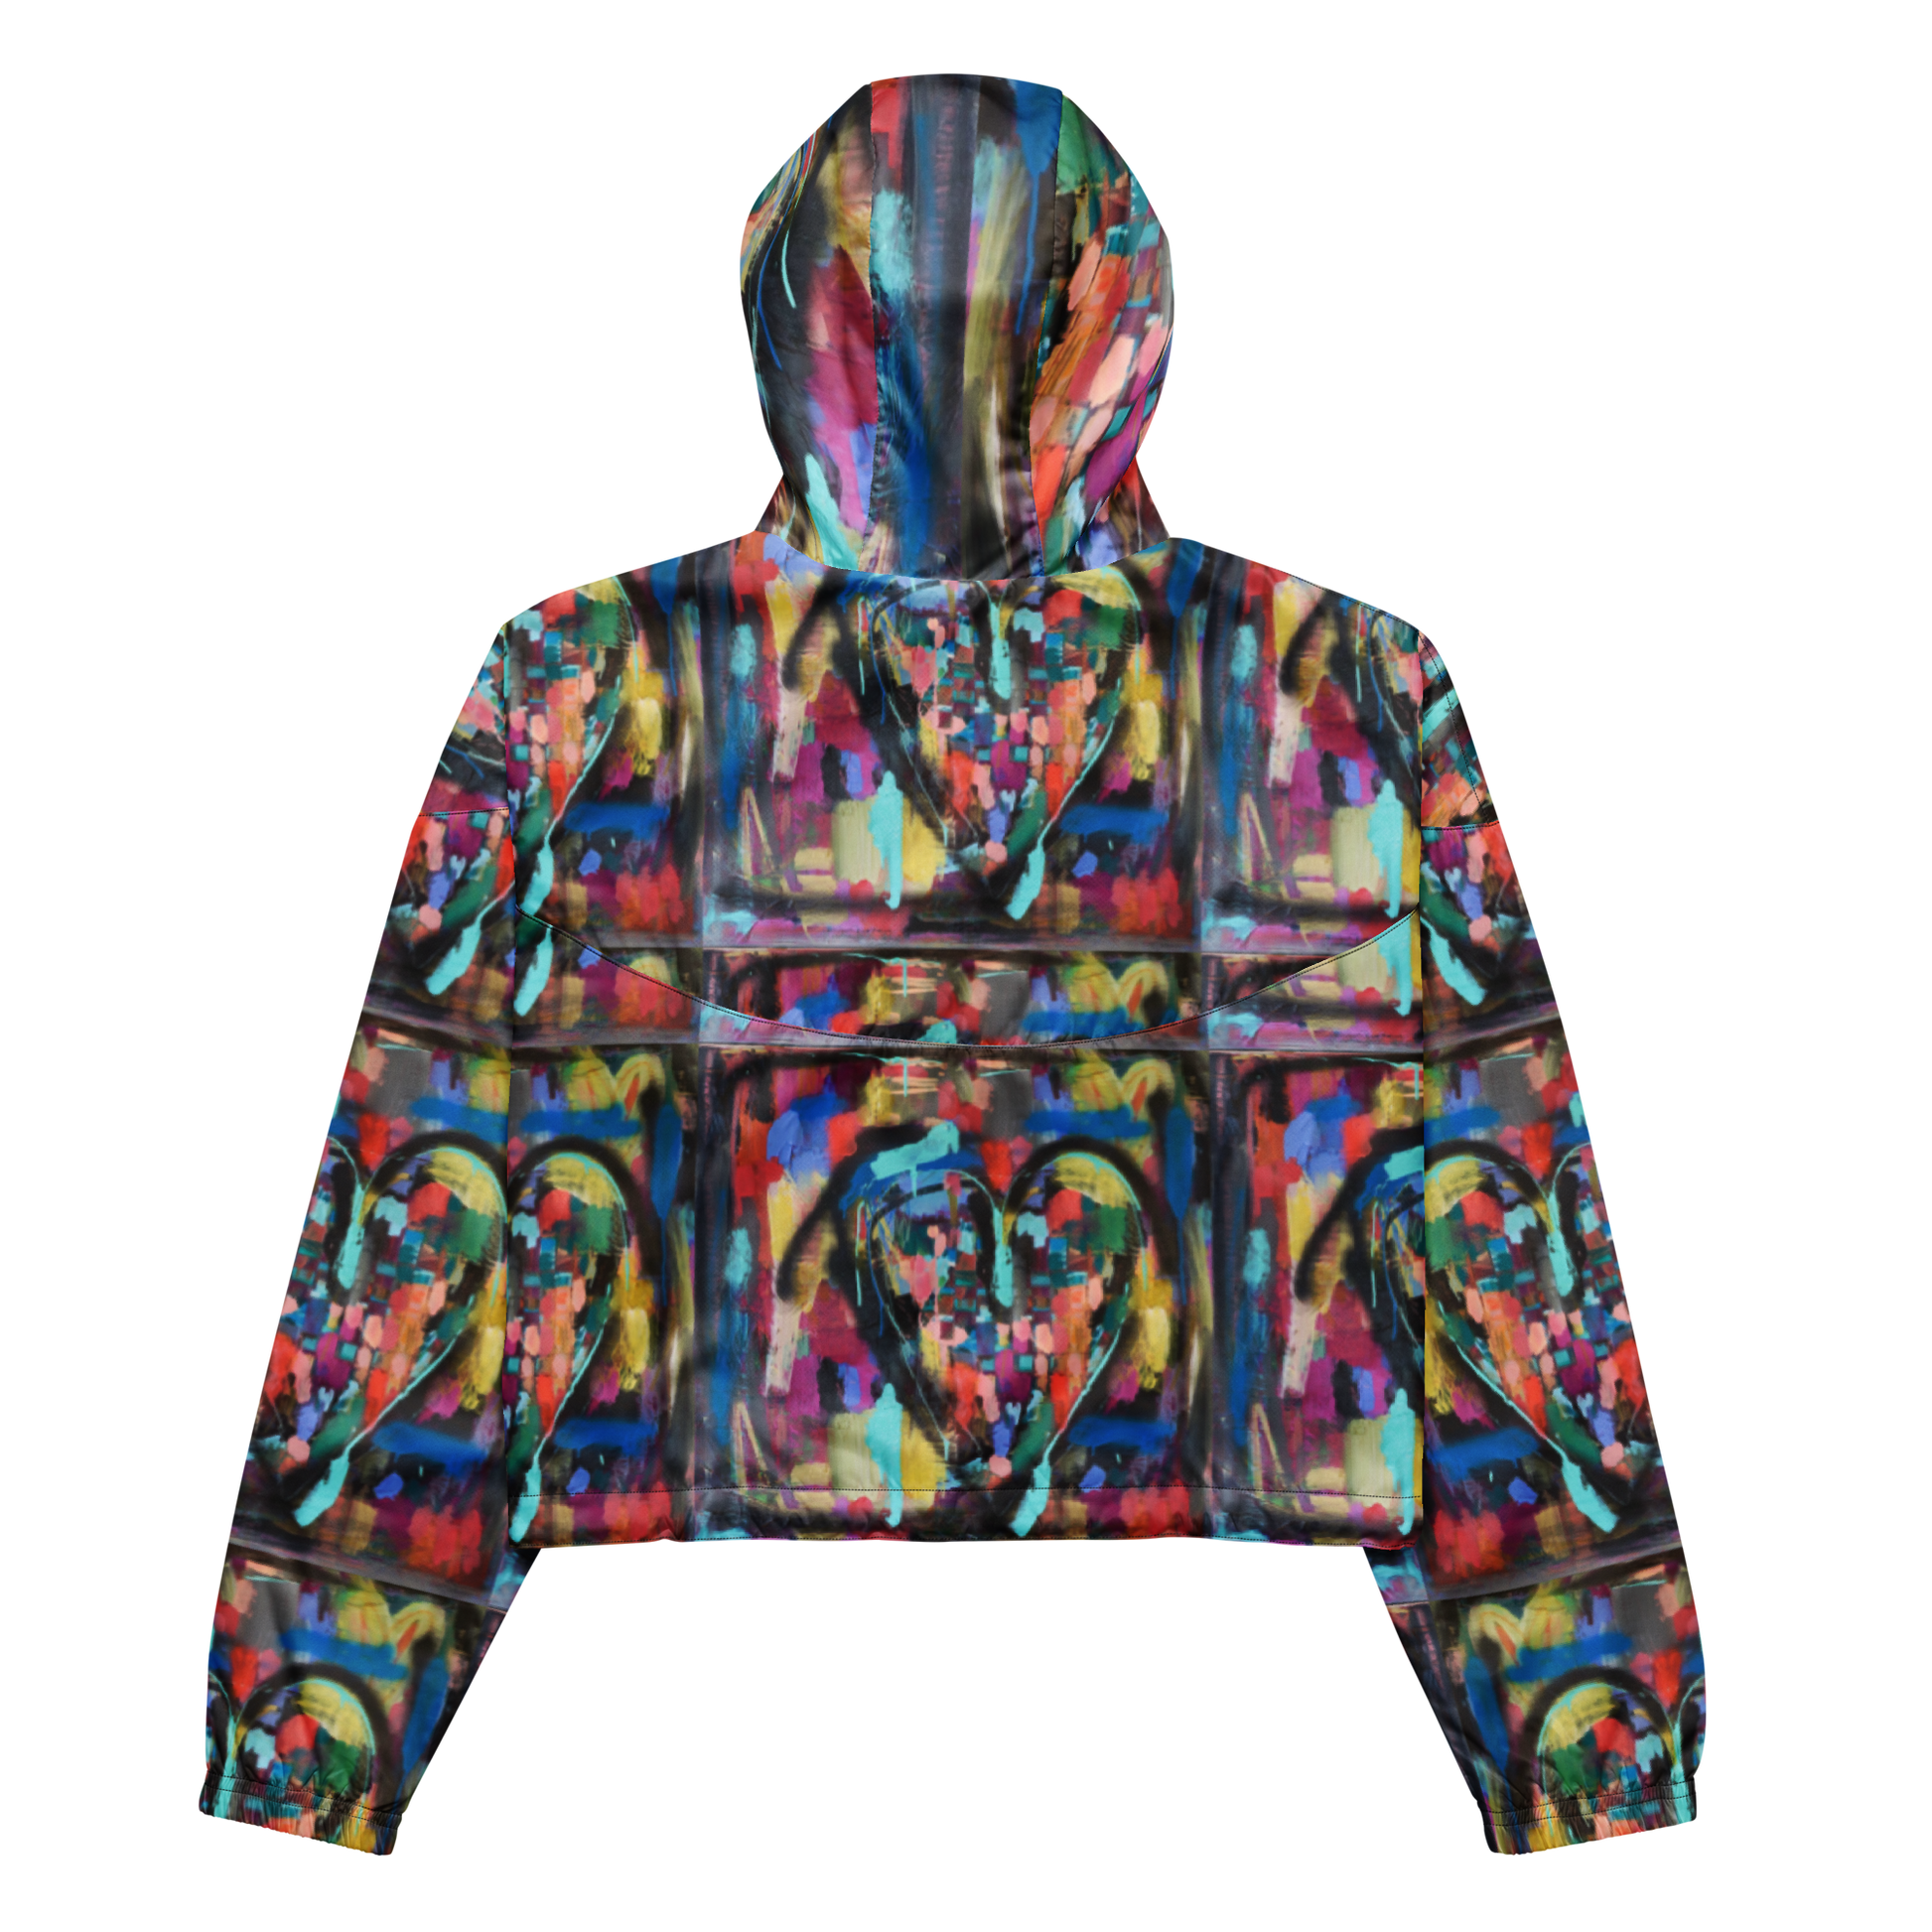 Woven to Protect - Women’s cropped windbreaker